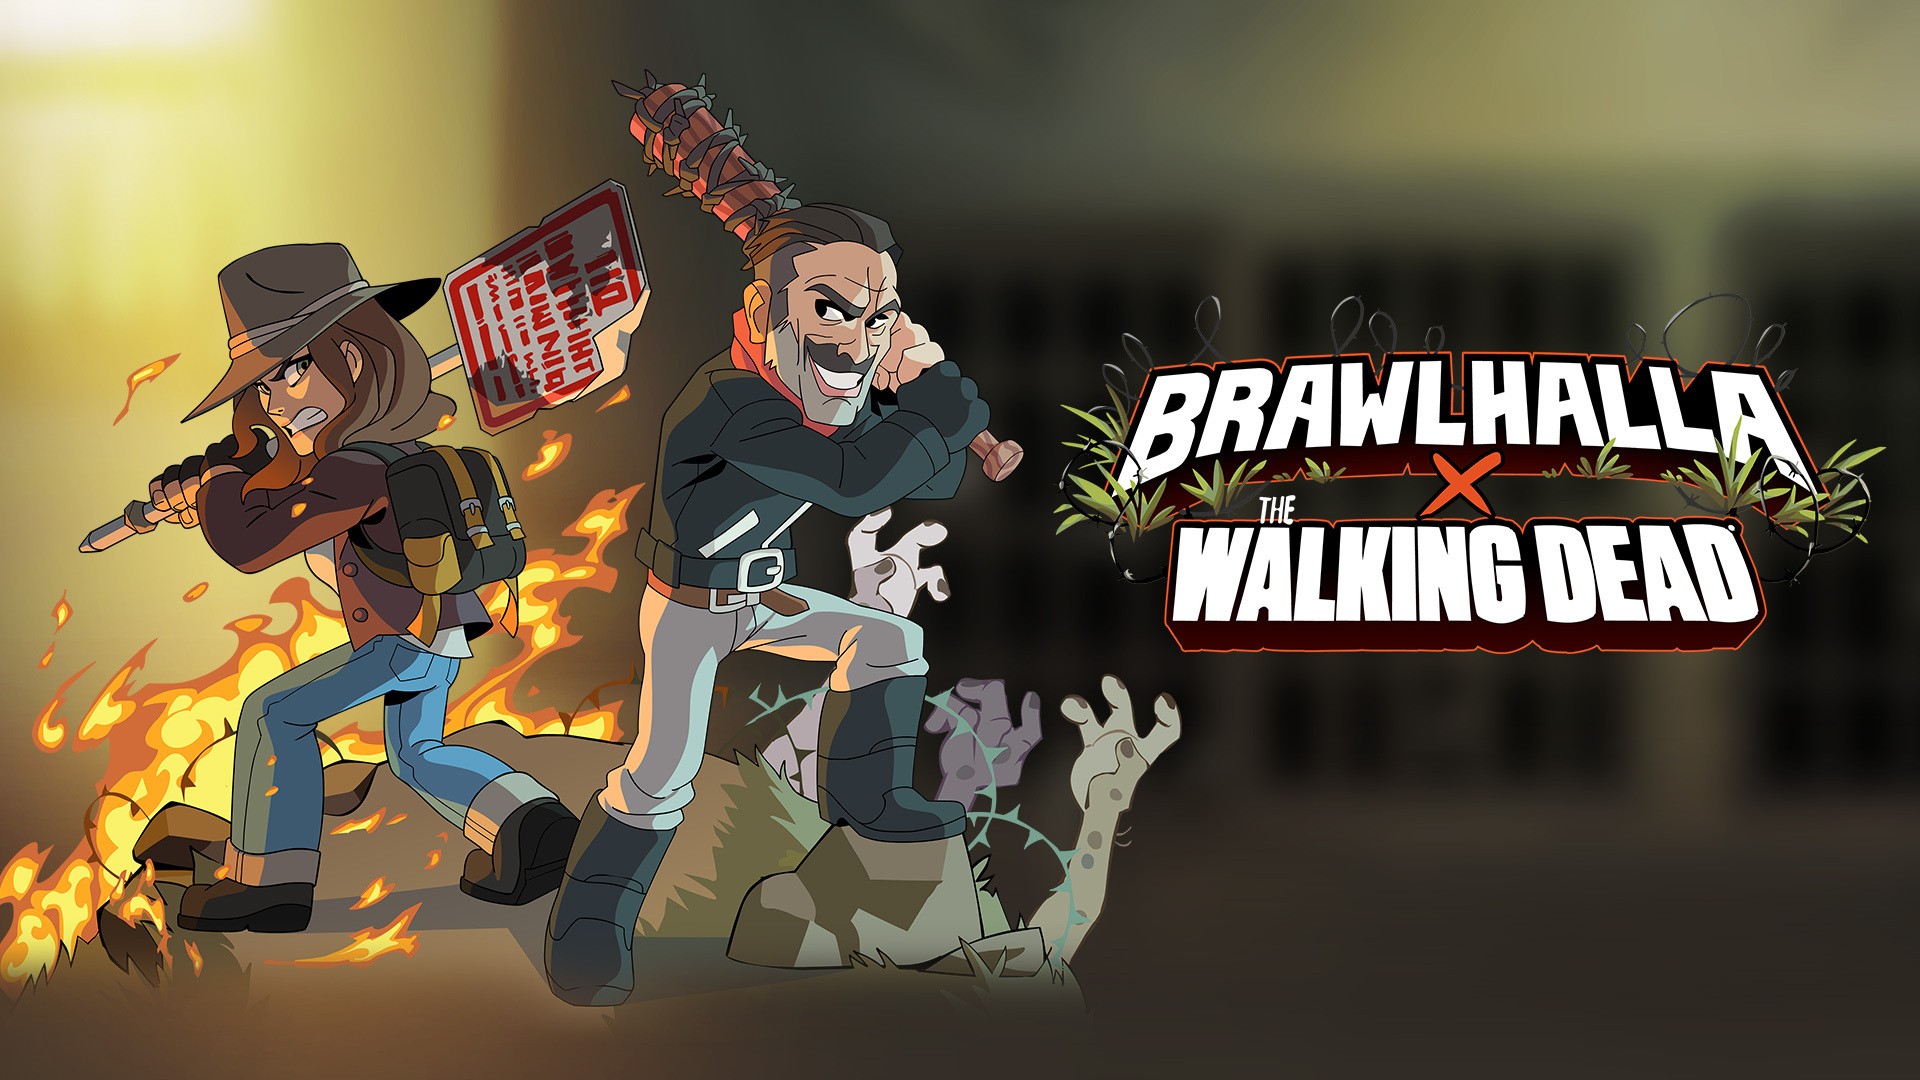 Negan And Maggie From AMC’s The Walking Dead Shake Things Up In Brawlhalla On September 22